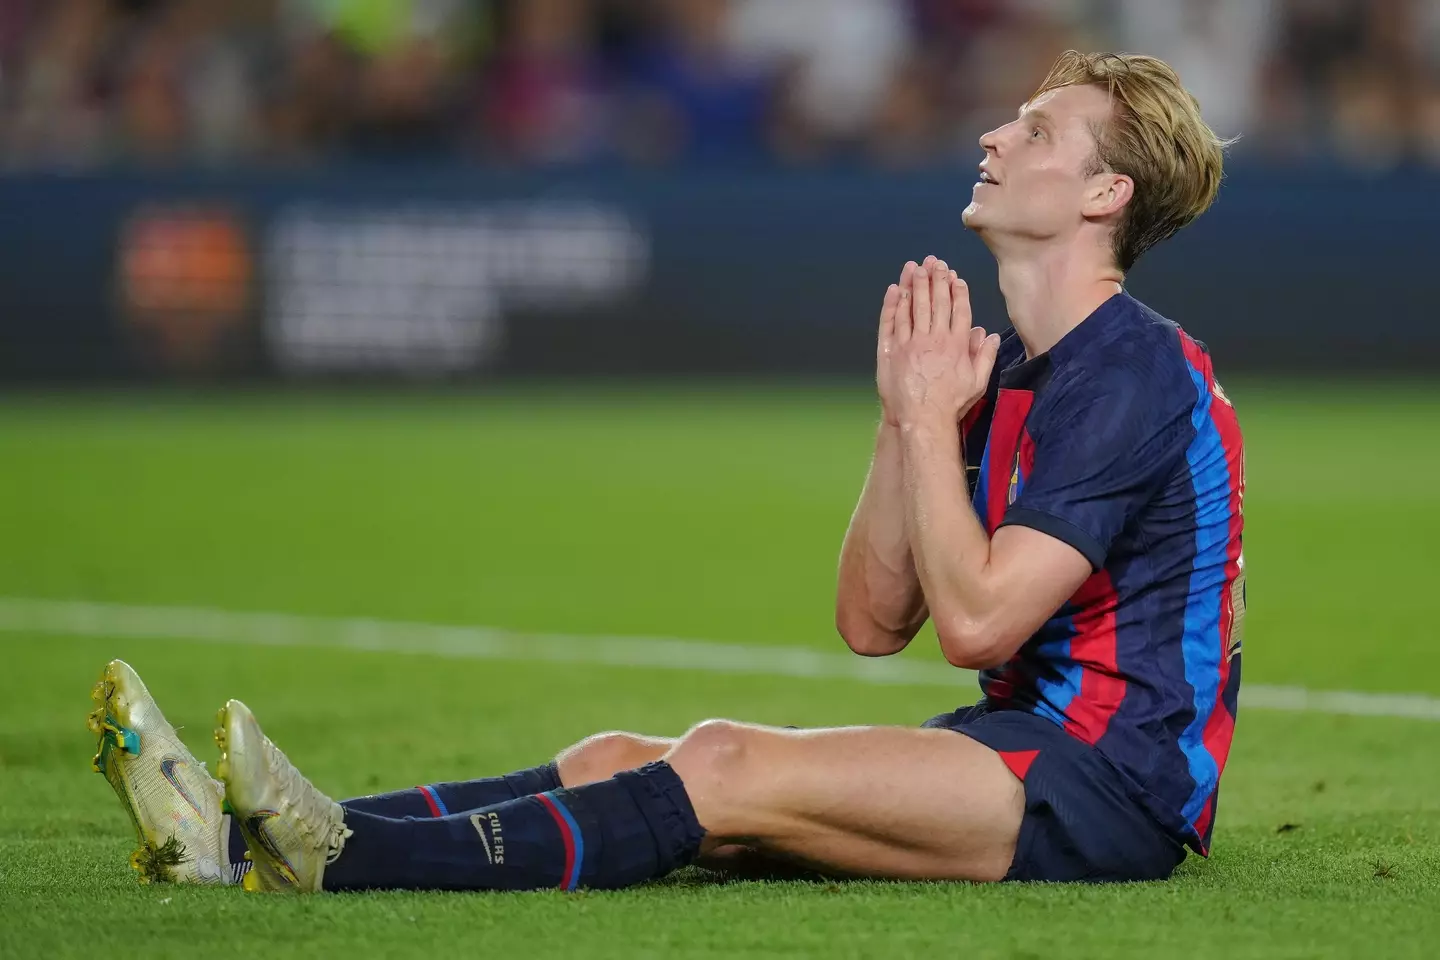 De Jong probably praying he's not off to United. Image: Alamy